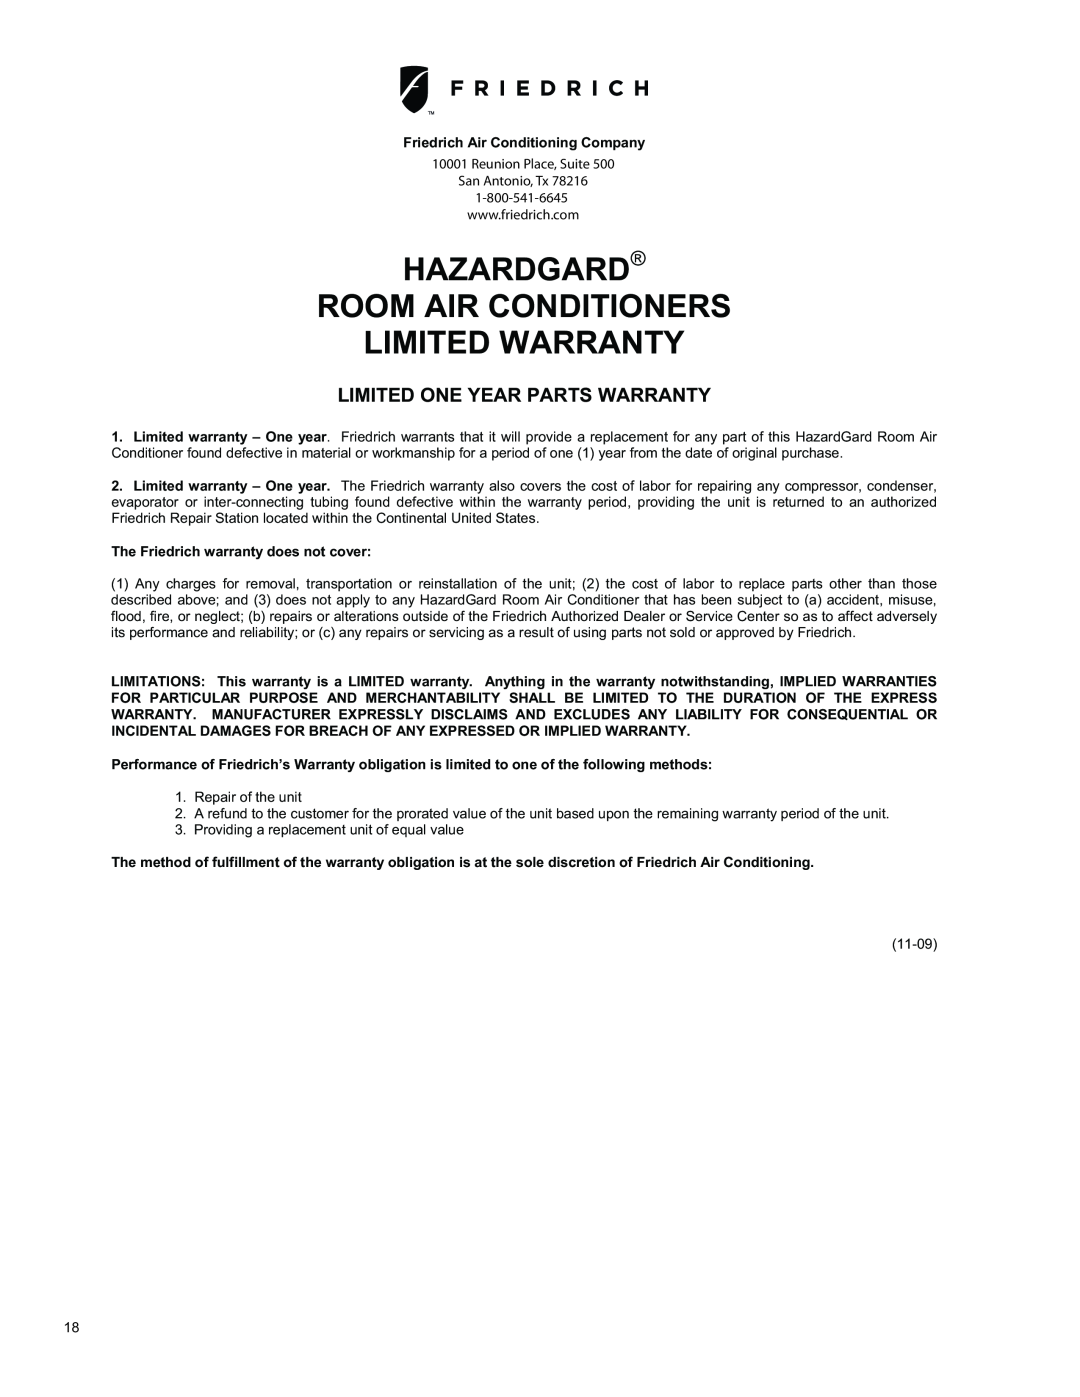 Friedrich SH15 operation manual Hazardgard Room Air Conditioners Limited Warranty, Limited One Year Parts Warranty 